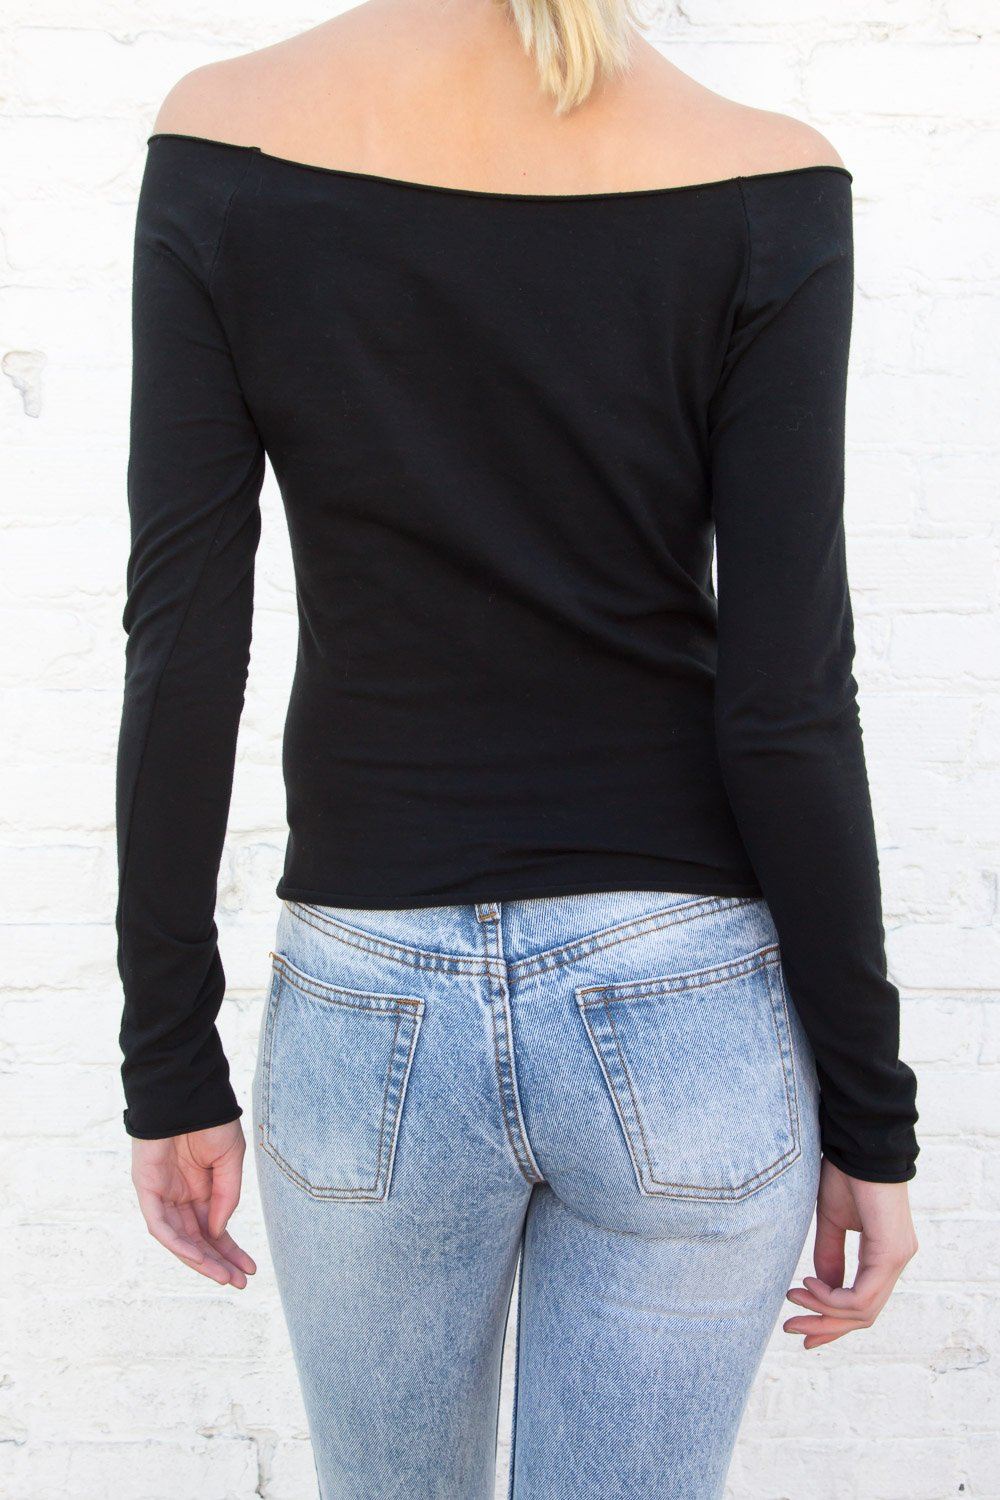 Brandy Melville Solid Black Long Sleeve Blouse One Size - 55% off